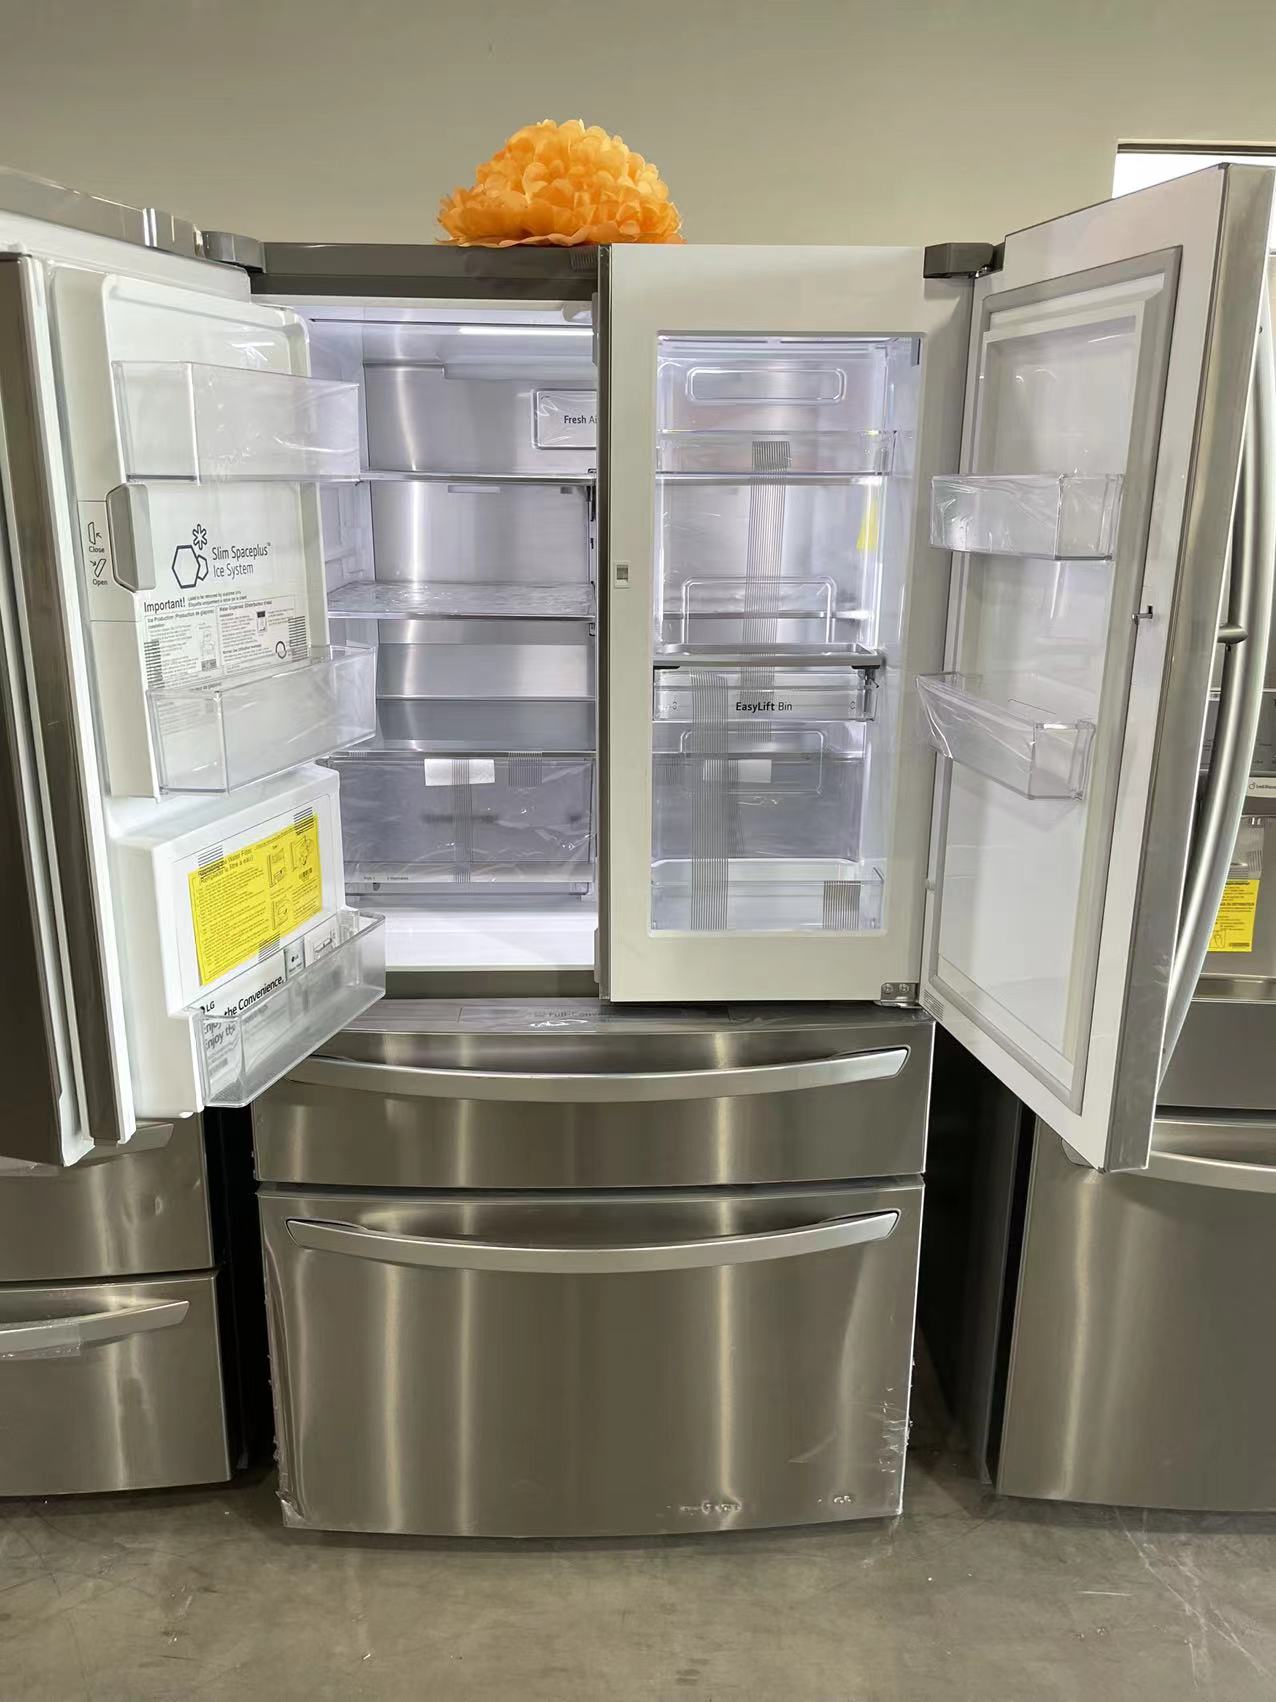 LRMDS3006S by LG - 30 cu. ft. Smart Refrigerator with Craft Ice